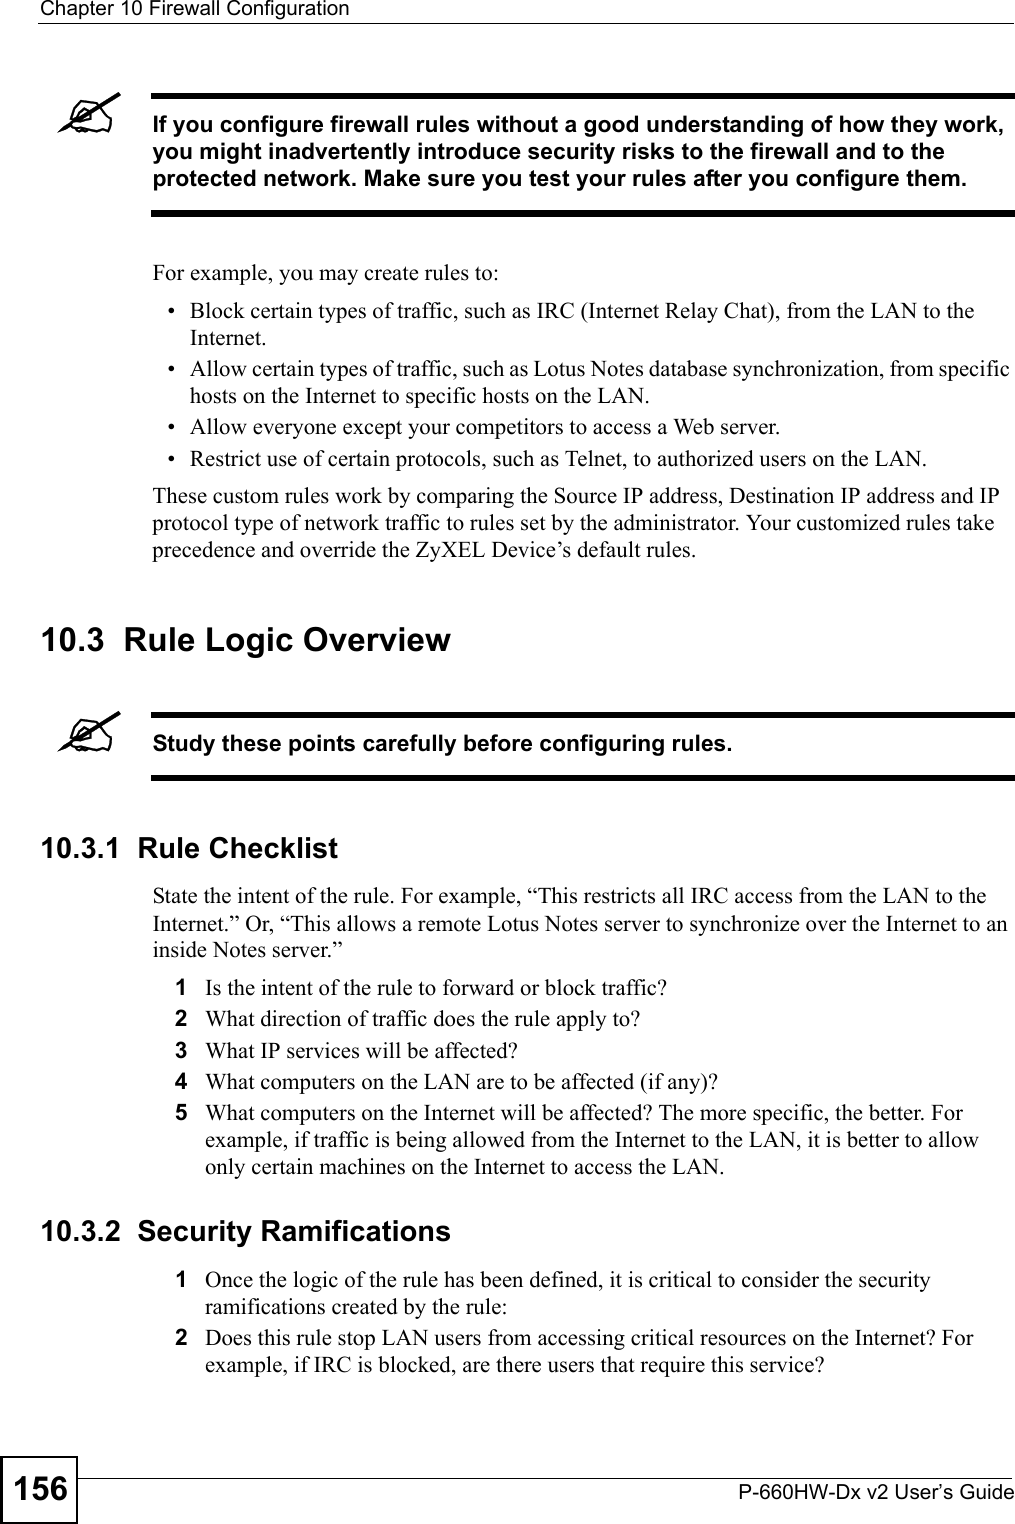 Chapter 10 Firewall ConfigurationP-660HW-Dx v2 User’s Guide156&quot;If you configure firewall rules without a good understanding of how they work, you might inadvertently introduce security risks to the firewall and to the protected network. Make sure you test your rules after you configure them.For example, you may create rules to:• Block certain types of traffic, such as IRC (Internet Relay Chat), from the LAN to the Internet.• Allow certain types of traffic, such as Lotus Notes database synchronization, from specific hosts on the Internet to specific hosts on the LAN.• Allow everyone except your competitors to access a Web server.• Restrict use of certain protocols, such as Telnet, to authorized users on the LAN.These custom rules work by comparing the Source IP address, Destination IP address and IP protocol type of network traffic to rules set by the administrator. Your customized rules take precedence and override the ZyXEL Device’s default rules. 10.3  Rule Logic Overview &quot;Study these points carefully before configuring rules.10.3.1  Rule ChecklistState the intent of the rule. For example, “This restricts all IRC access from the LAN to the Internet.” Or, “This allows a remote Lotus Notes server to synchronize over the Internet to an inside Notes server.”1Is the intent of the rule to forward or block traffic?2What direction of traffic does the rule apply to?3What IP services will be affected?4What computers on the LAN are to be affected (if any)?5What computers on the Internet will be affected? The more specific, the better. For example, if traffic is being allowed from the Internet to the LAN, it is better to allow only certain machines on the Internet to access the LAN.10.3.2  Security Ramifications1Once the logic of the rule has been defined, it is critical to consider the security ramifications created by the rule:2Does this rule stop LAN users from accessing critical resources on the Internet? For example, if IRC is blocked, are there users that require this service?